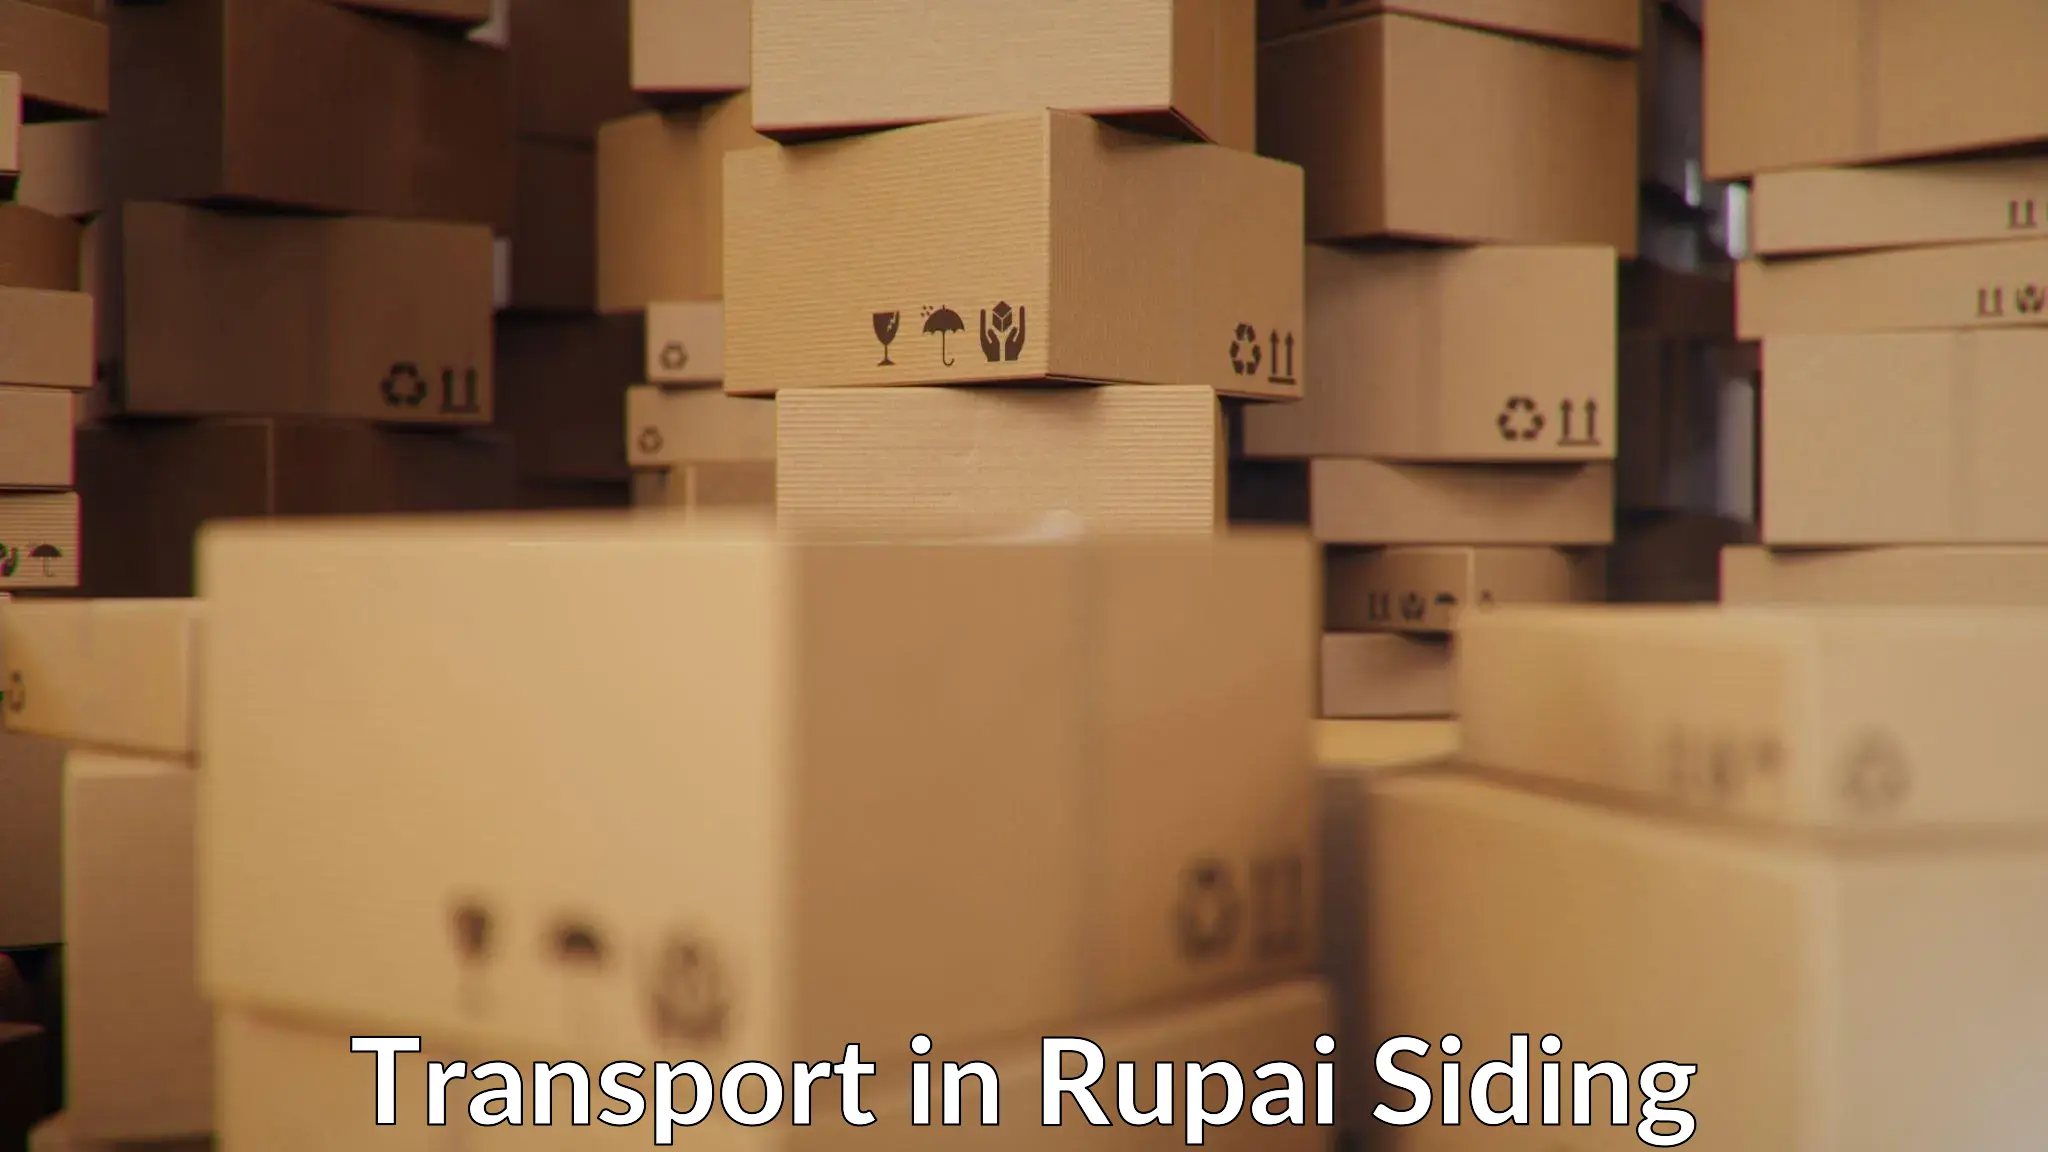 Express transport services in Rupai Siding